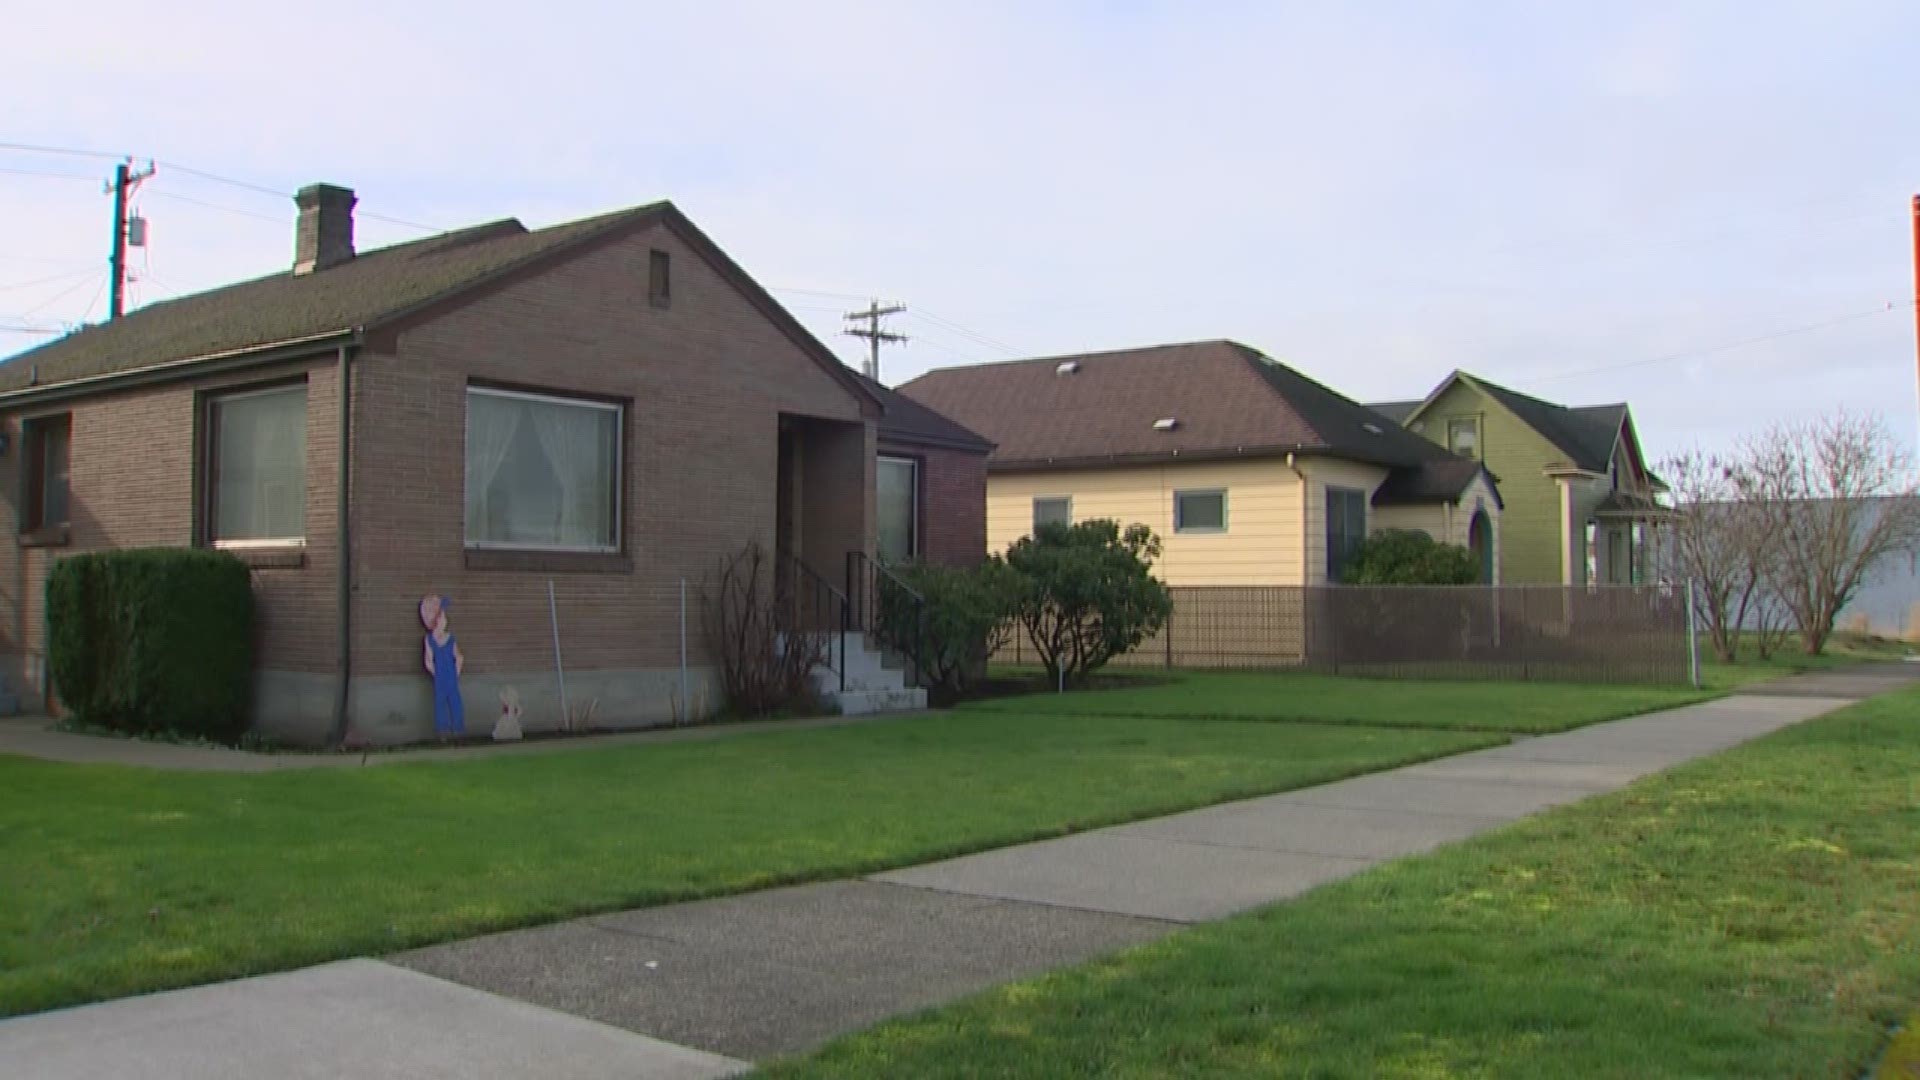 The Everett Herald reports homeowners in Marysville are seeing an average increase of 900 dollars a year.